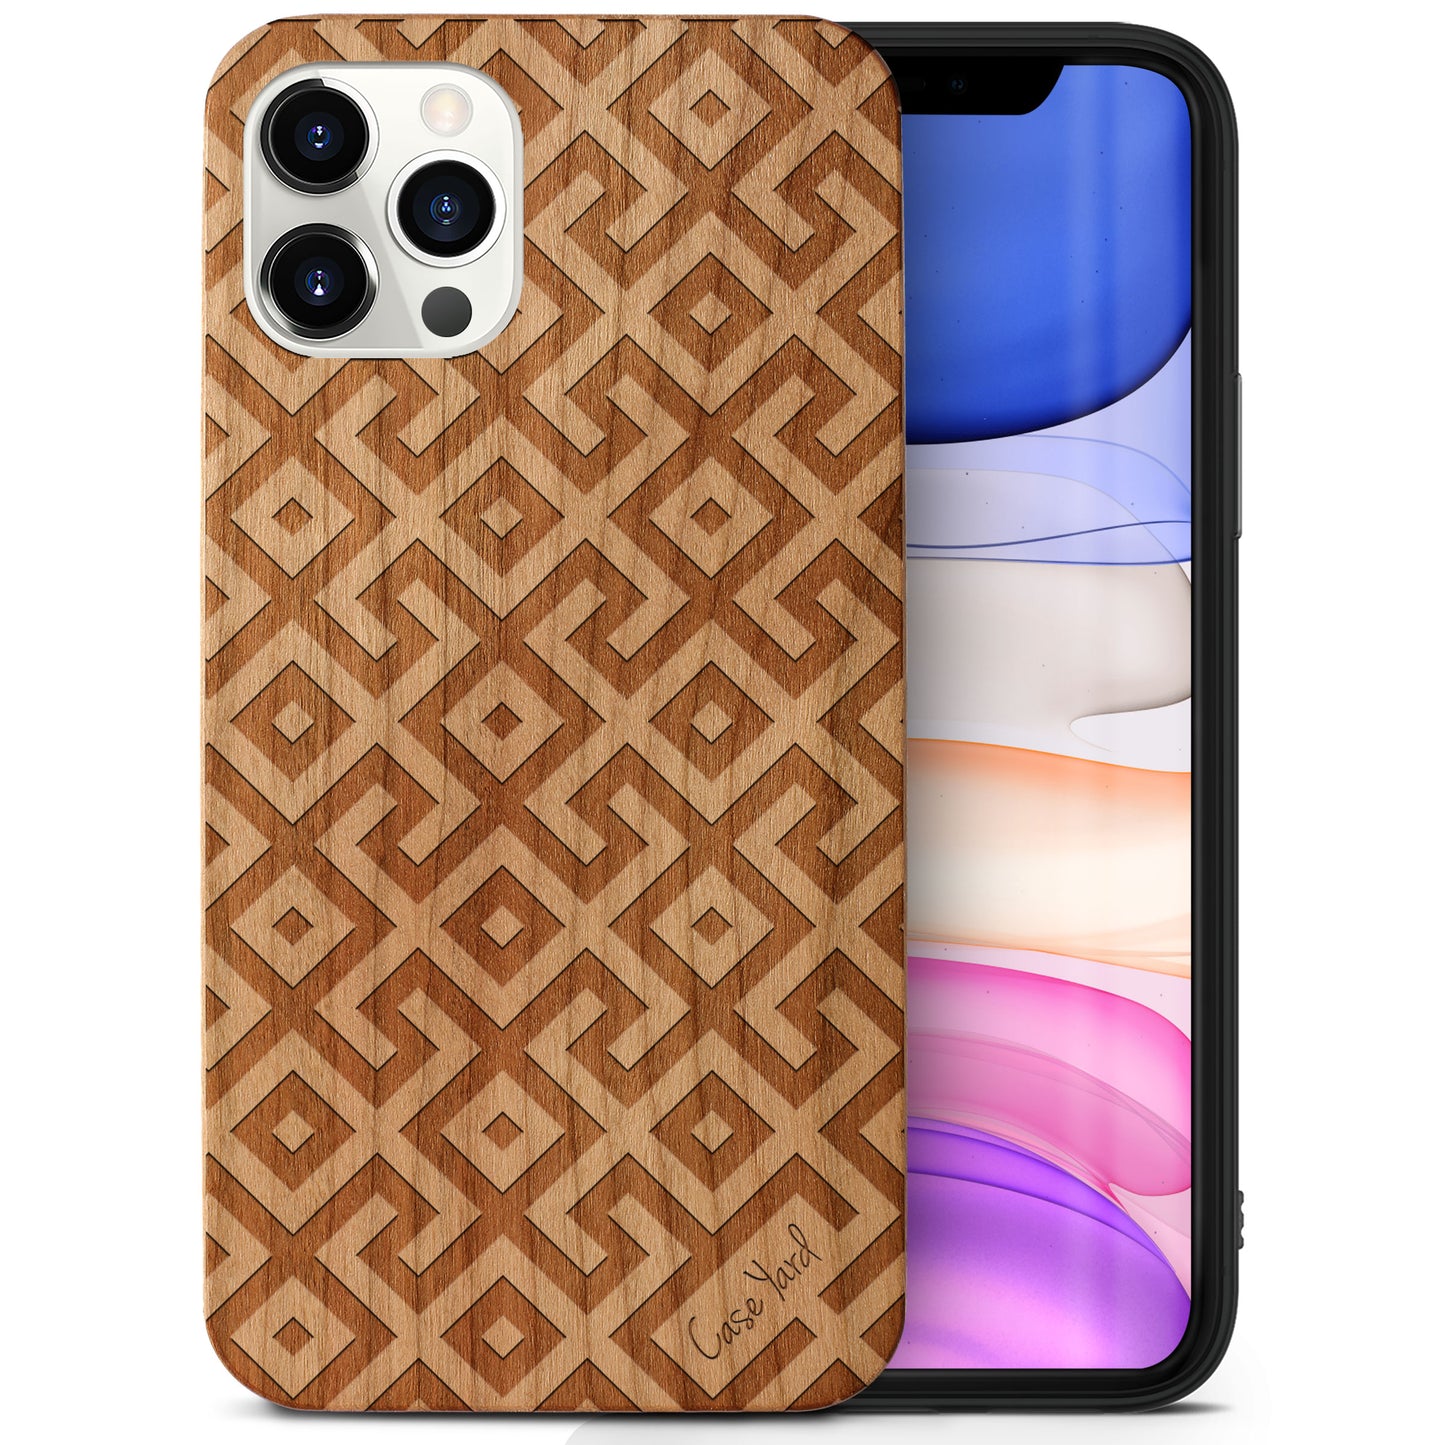 Wooden Cell Phone Case Cover, Laser Engraved case for iPhone & Samsung phone Square Pattern Design